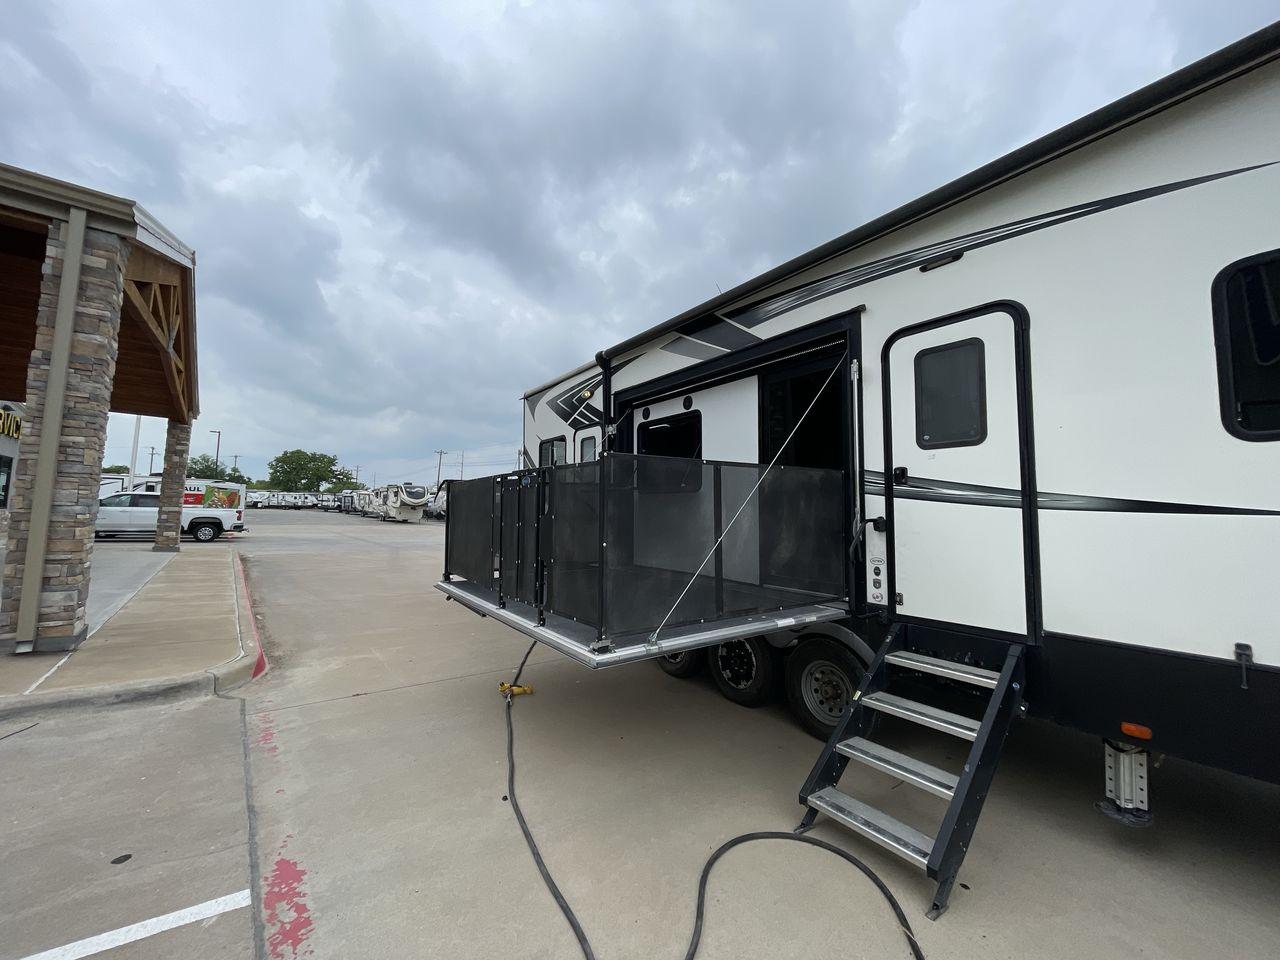 2019 HEARTLAND ROAD WARRIOR 427RW (5SFCG4435KE) , Length: 44.08 ft. | Dry Weight: 16,400 lbs. | Gross Weight: 20,000 lbs. | Slides: 2 transmission, located at 4319 N Main Street, Cleburne, TX, 76033, (817) 221-0660, 32.435829, -97.384178 - The 2019 Heartland Road Warrior 427RW fifth wheel toy hauler is ready for your next journey. The length of this amazing RV is 44.08 feet, its dry weight is 16,400 lbs and its gross weight is 20,000 lbs. This makes it stable and long-lasting on the road. This RV is strong and stylish, with two slides - Photo #23